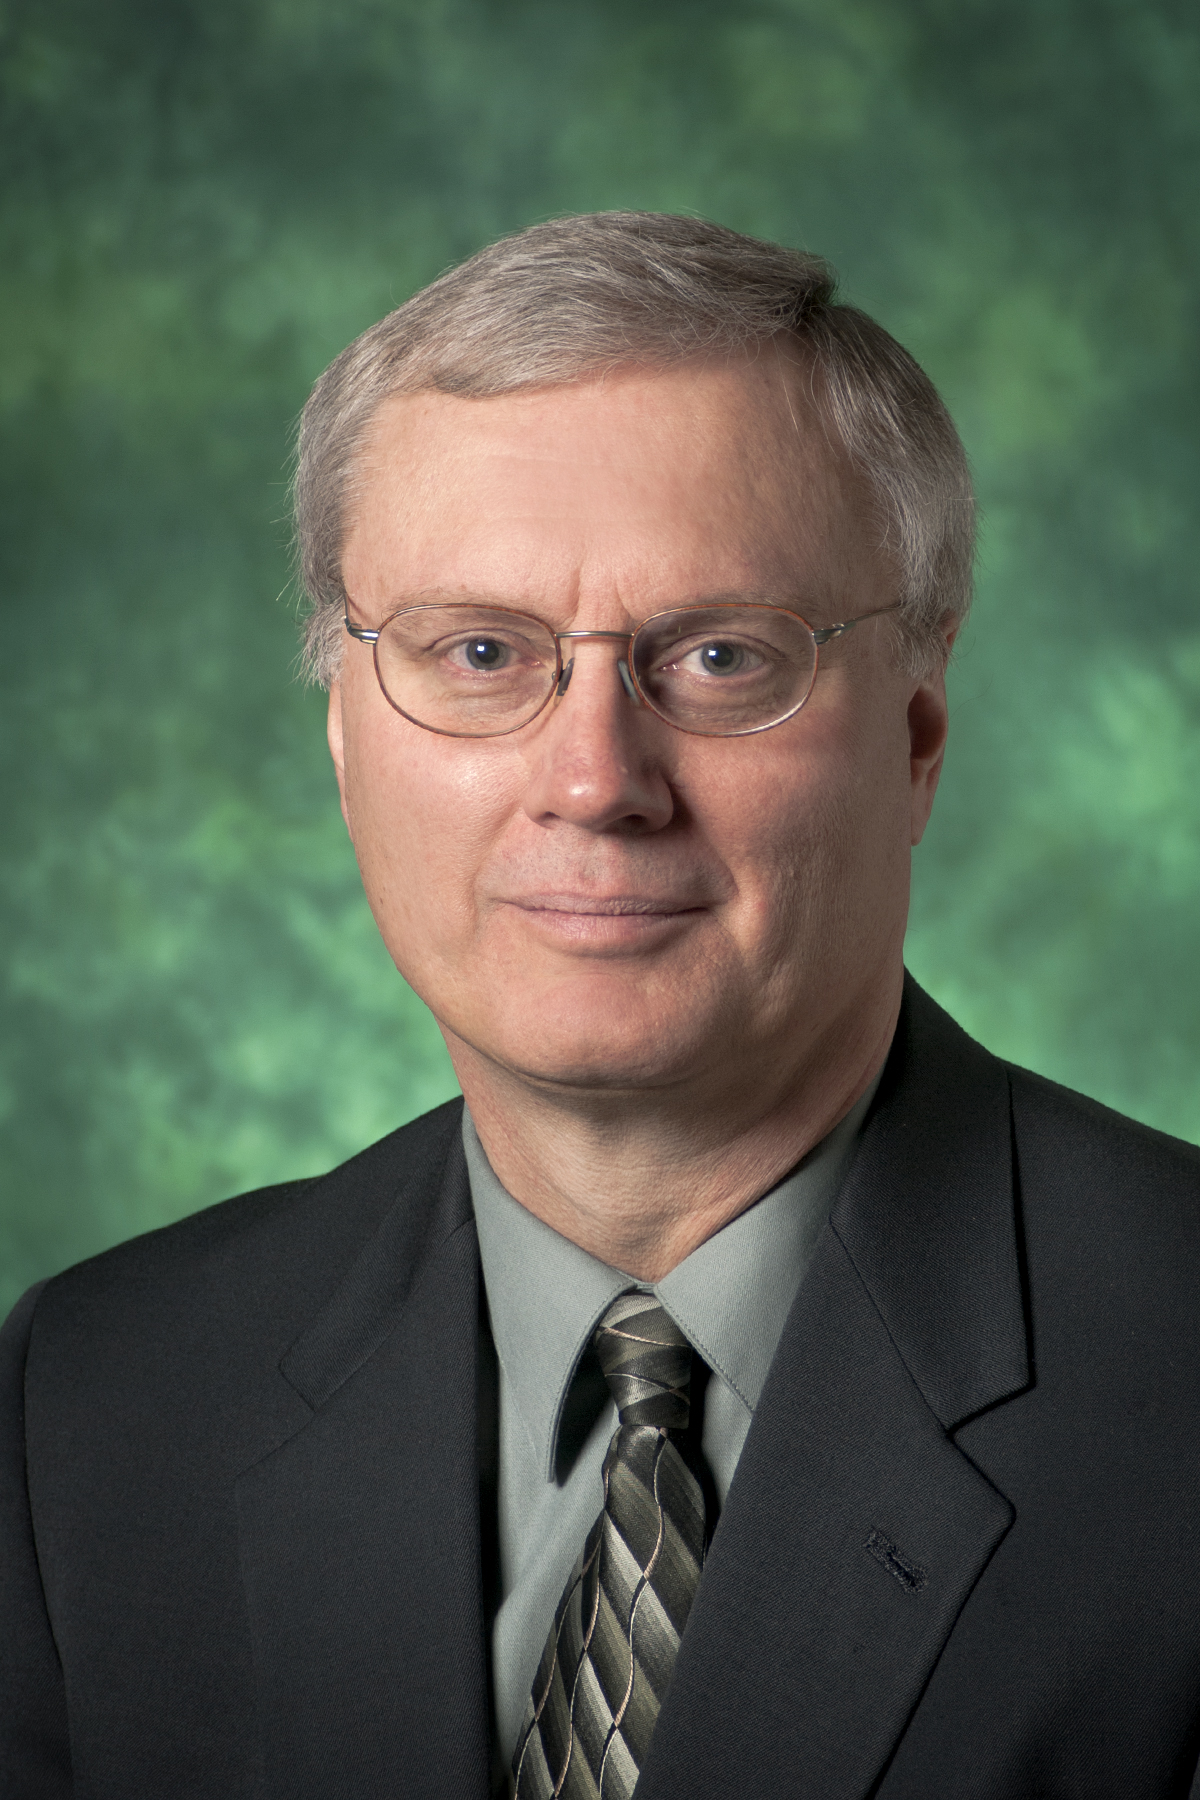 Robert L. Bland, a faculty member in the UNT Department of Public Administration, was named an honorary member of the International City/County Management Association.